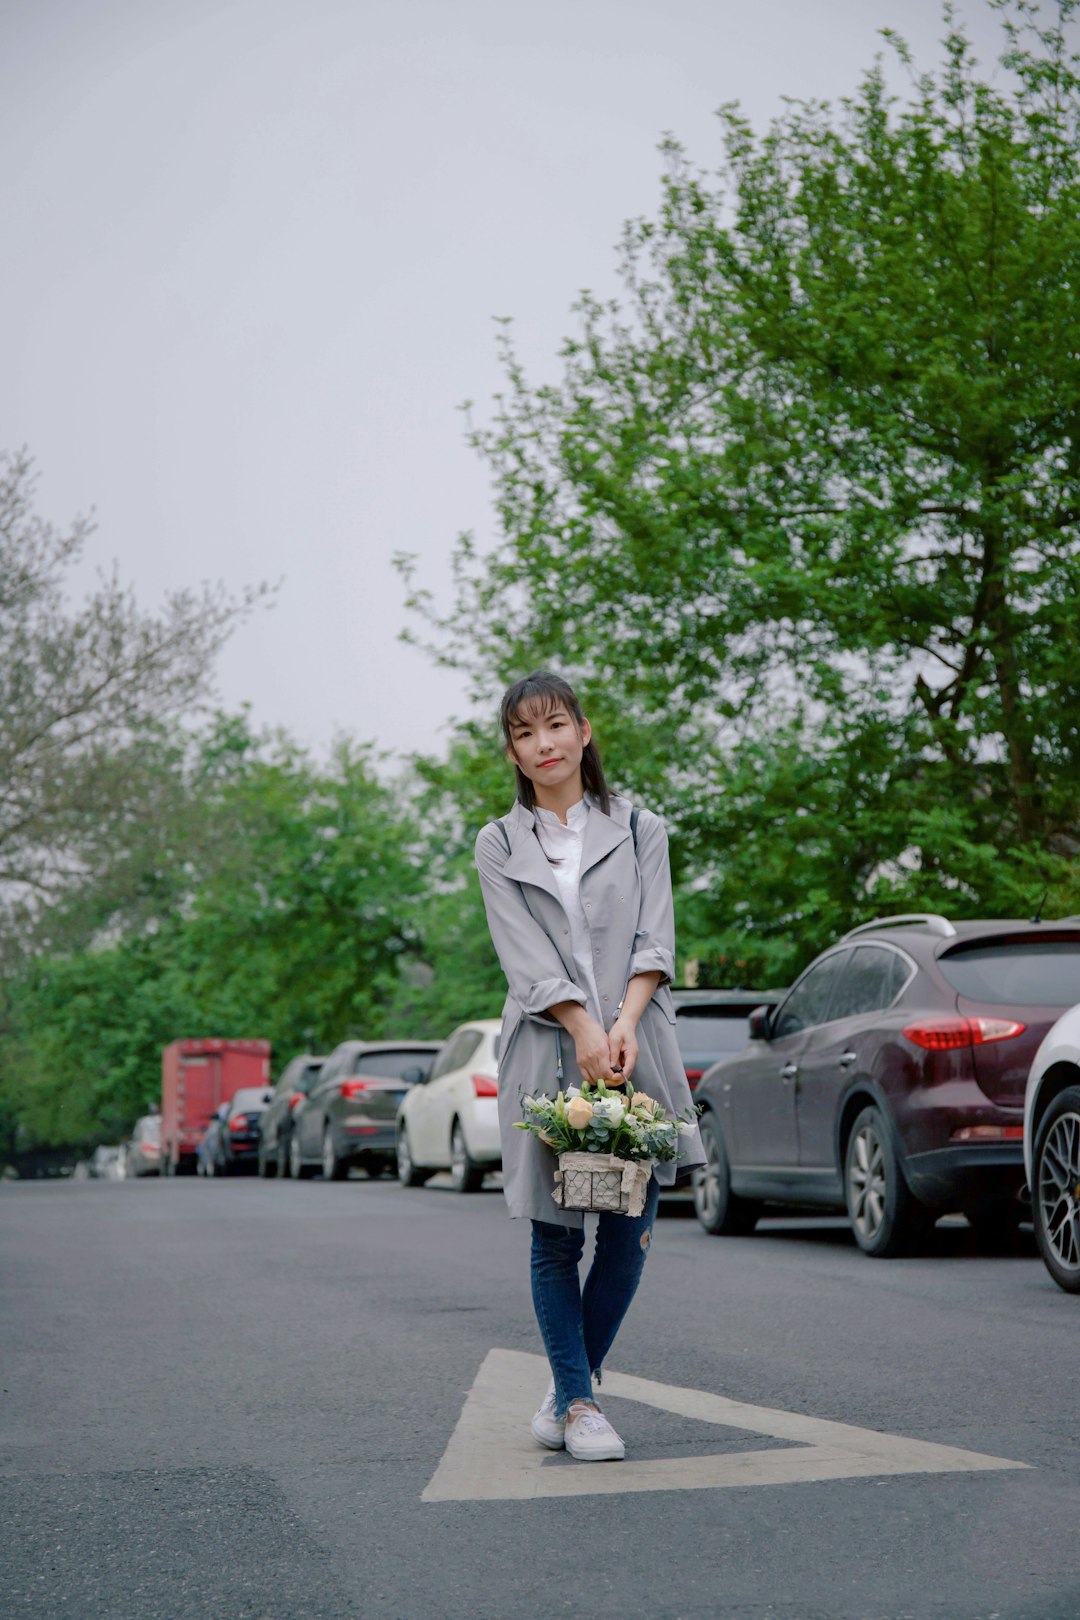 woman holding basket of flower standing in middle of road near parked vehicles